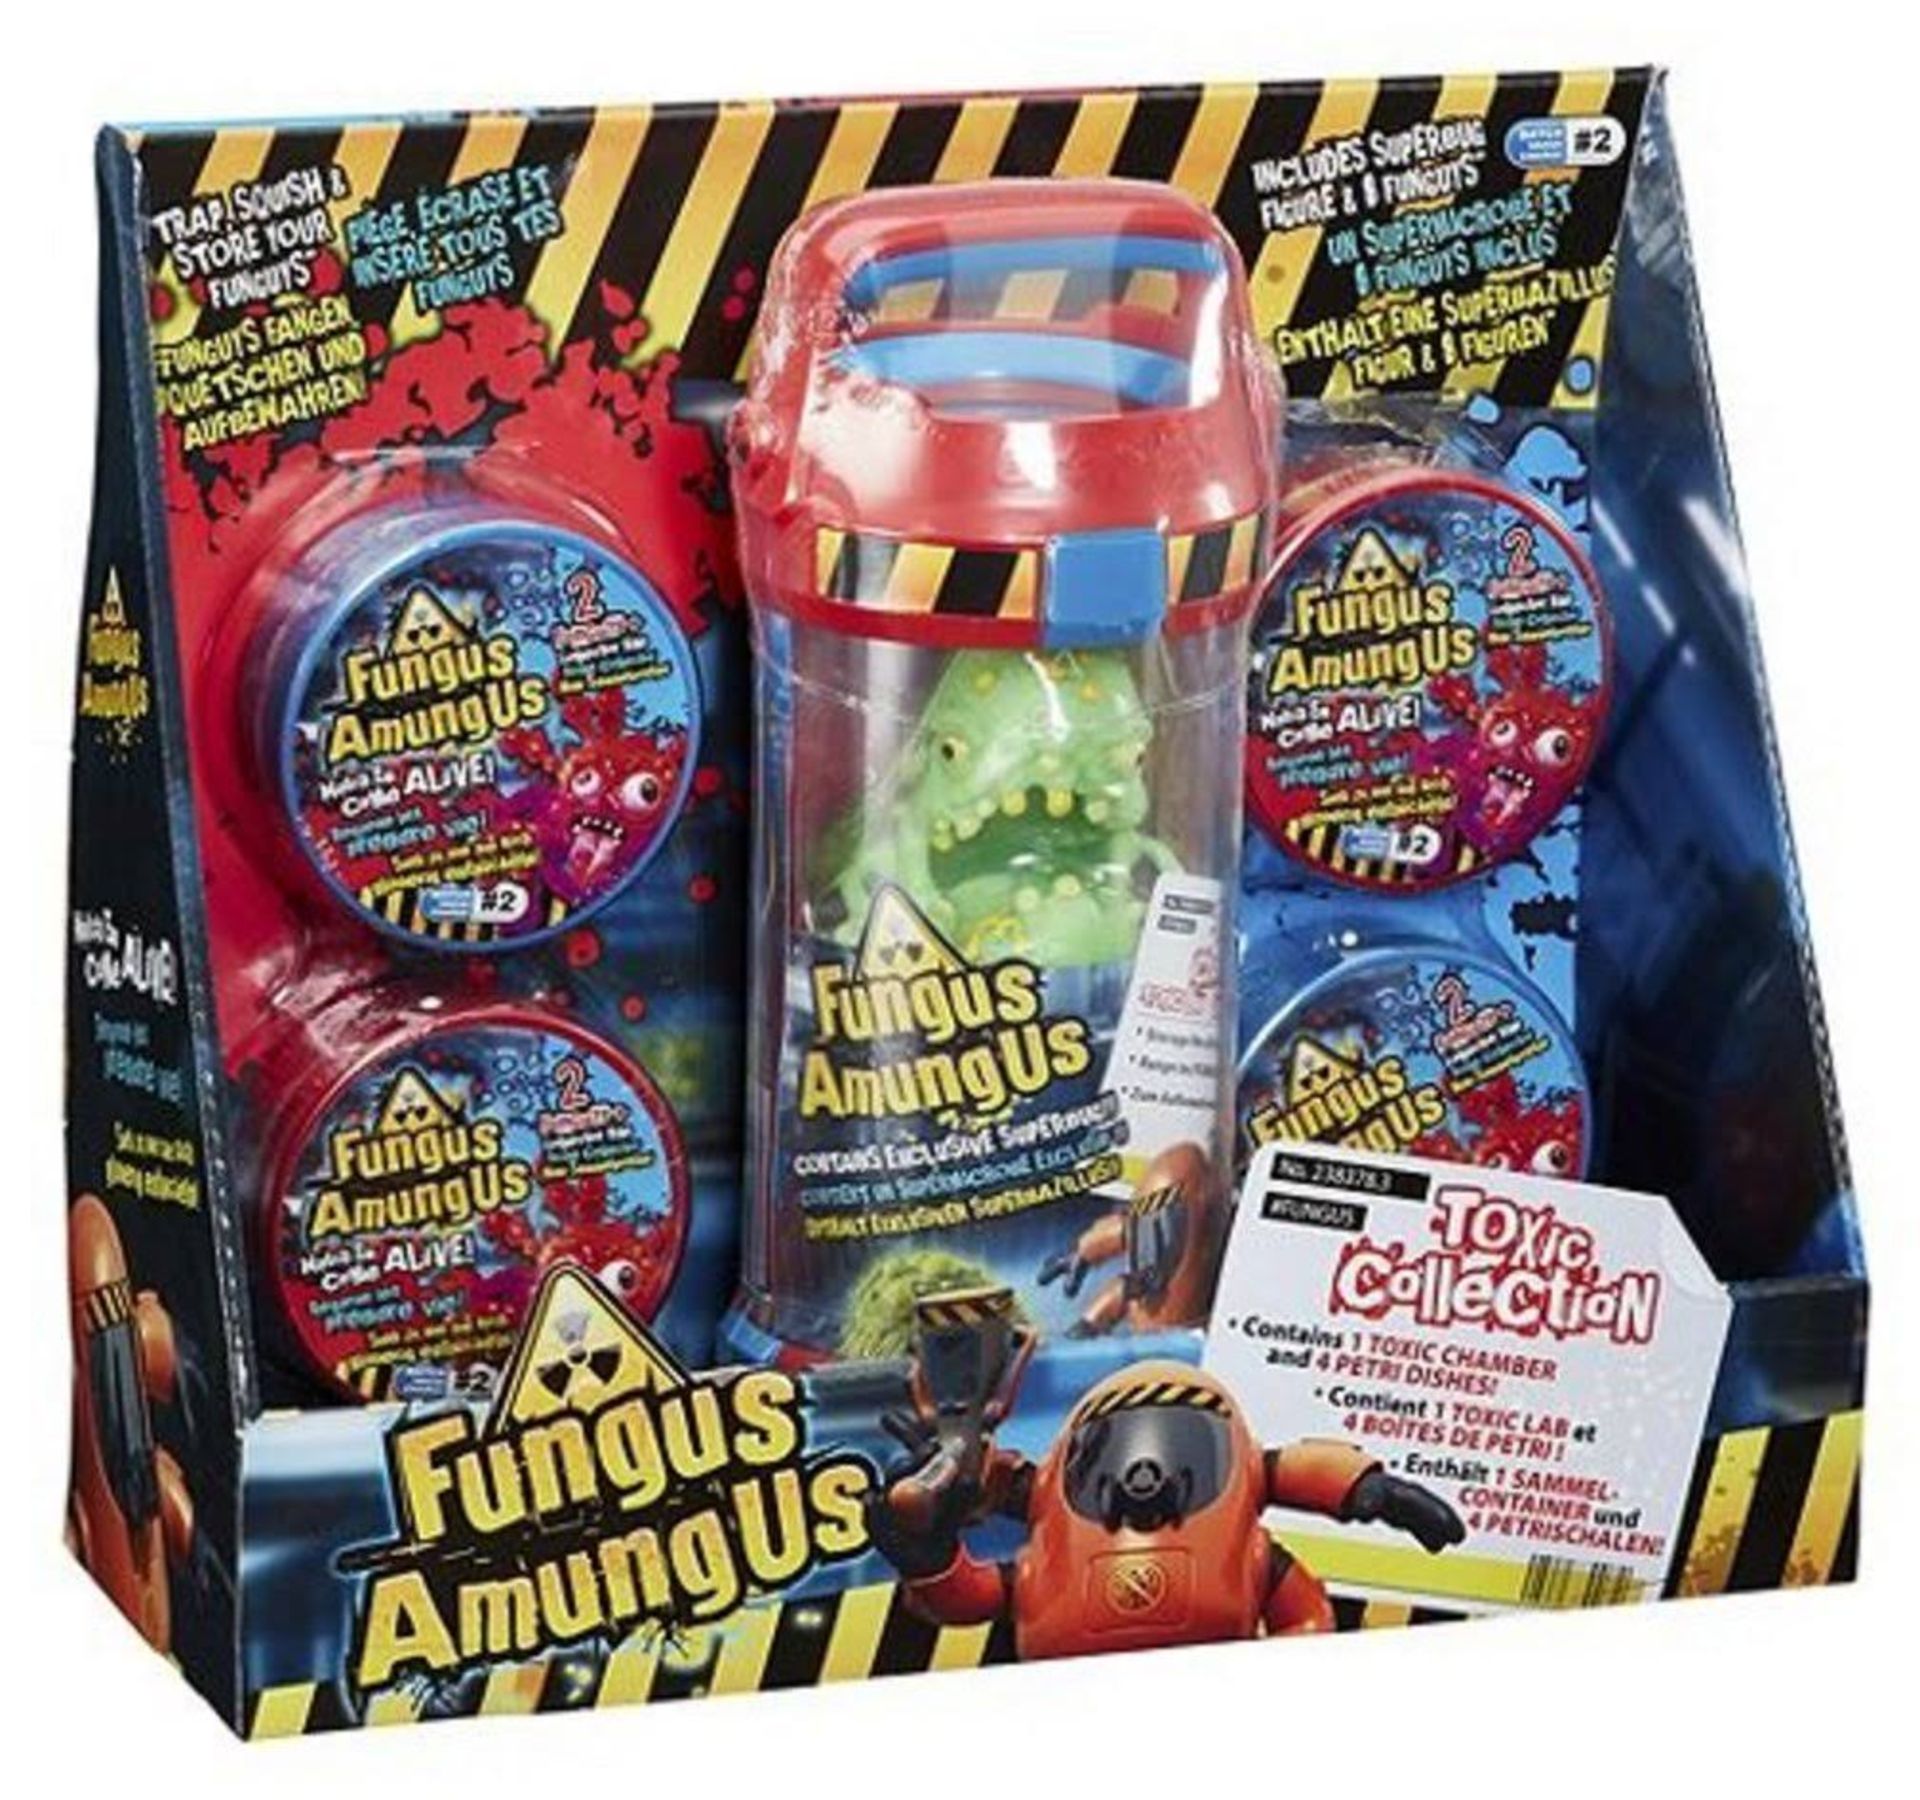 V *TRADE QTY* Brand New Fungus Amungus Toxic Collection ISP Up To £24.99 (Ebay) X 60 YOUR BID